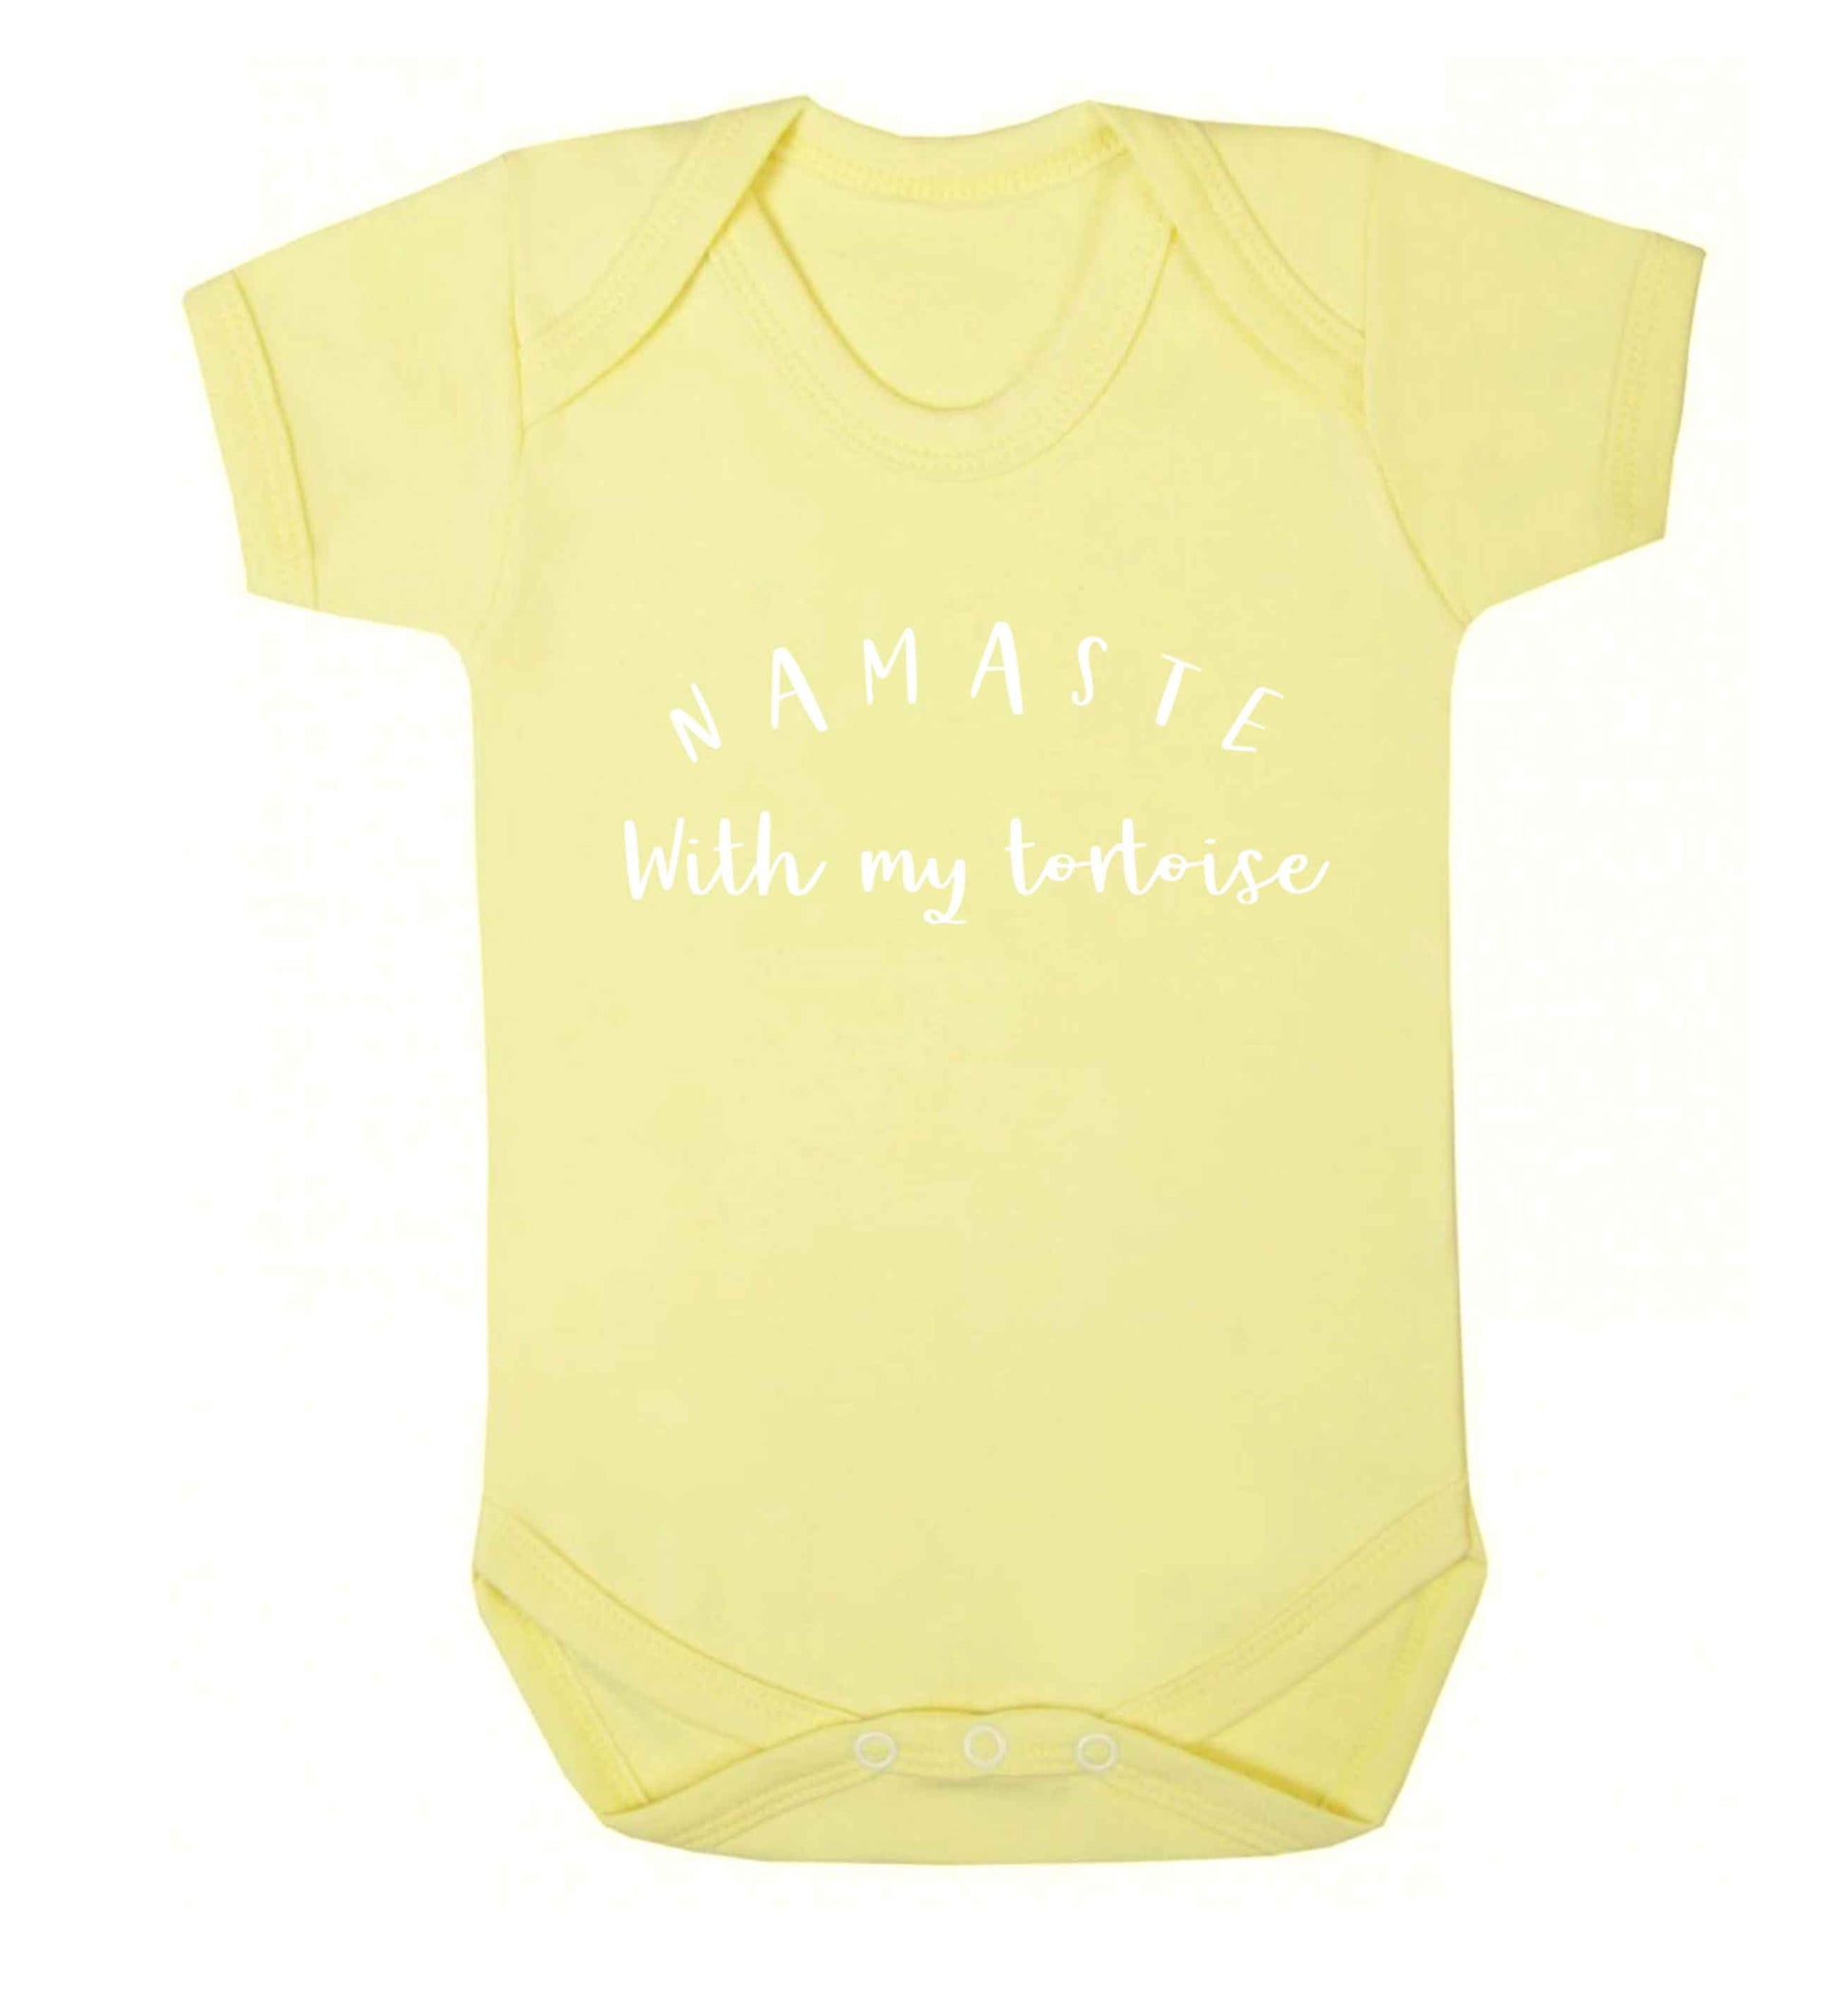 Namaste with my tortoise Baby Vest pale yellow 18-24 months